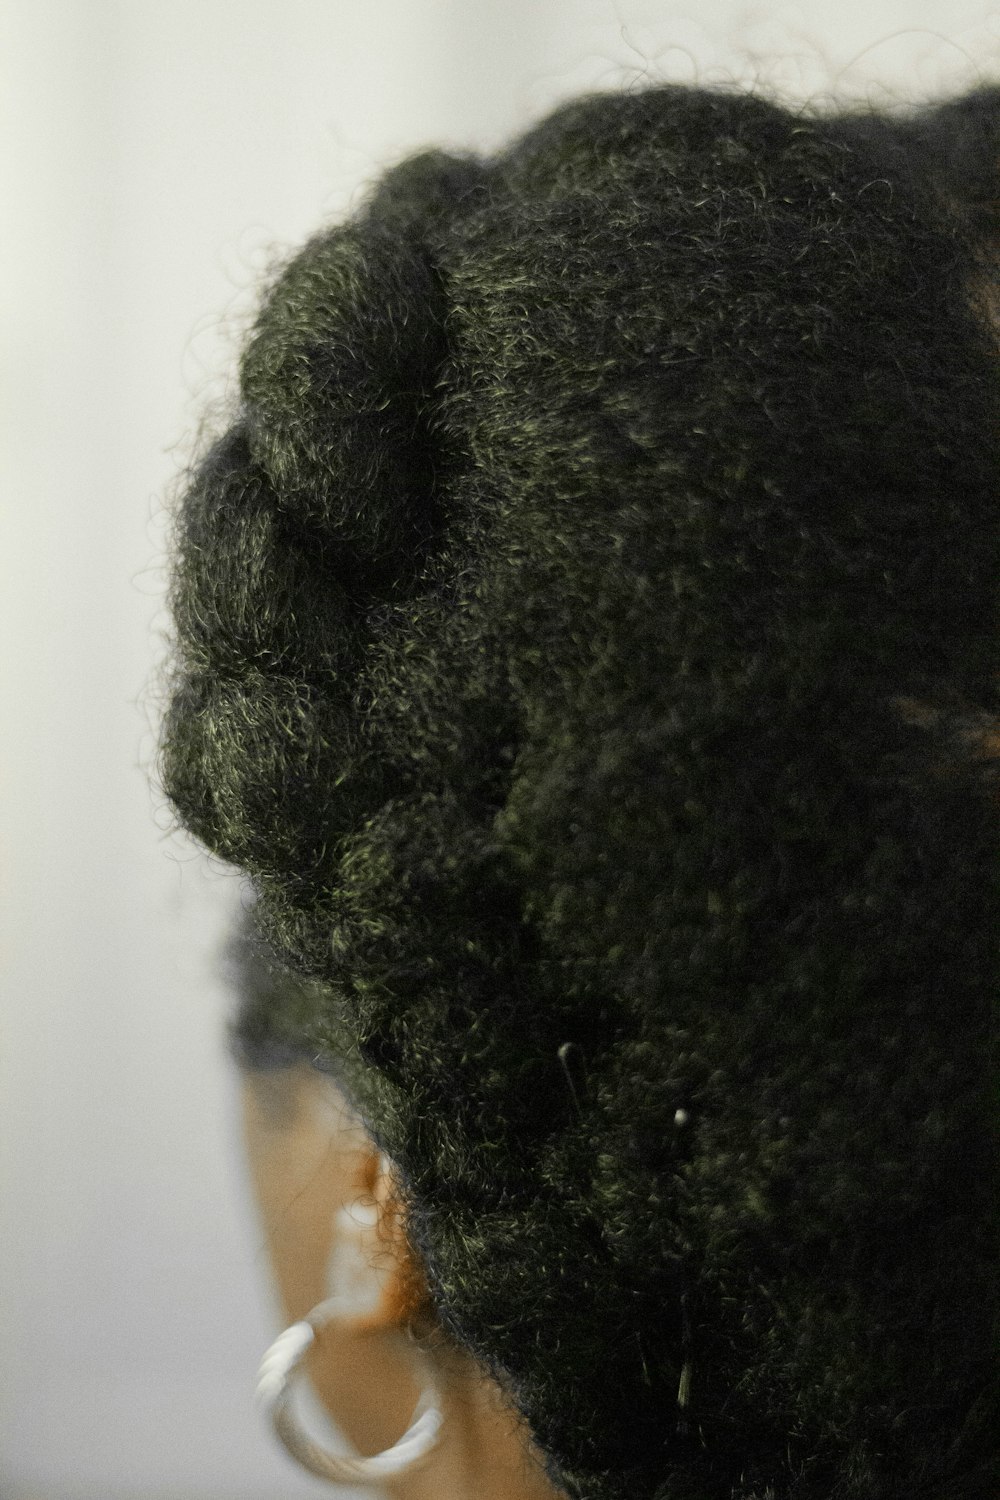 person with black curly hair